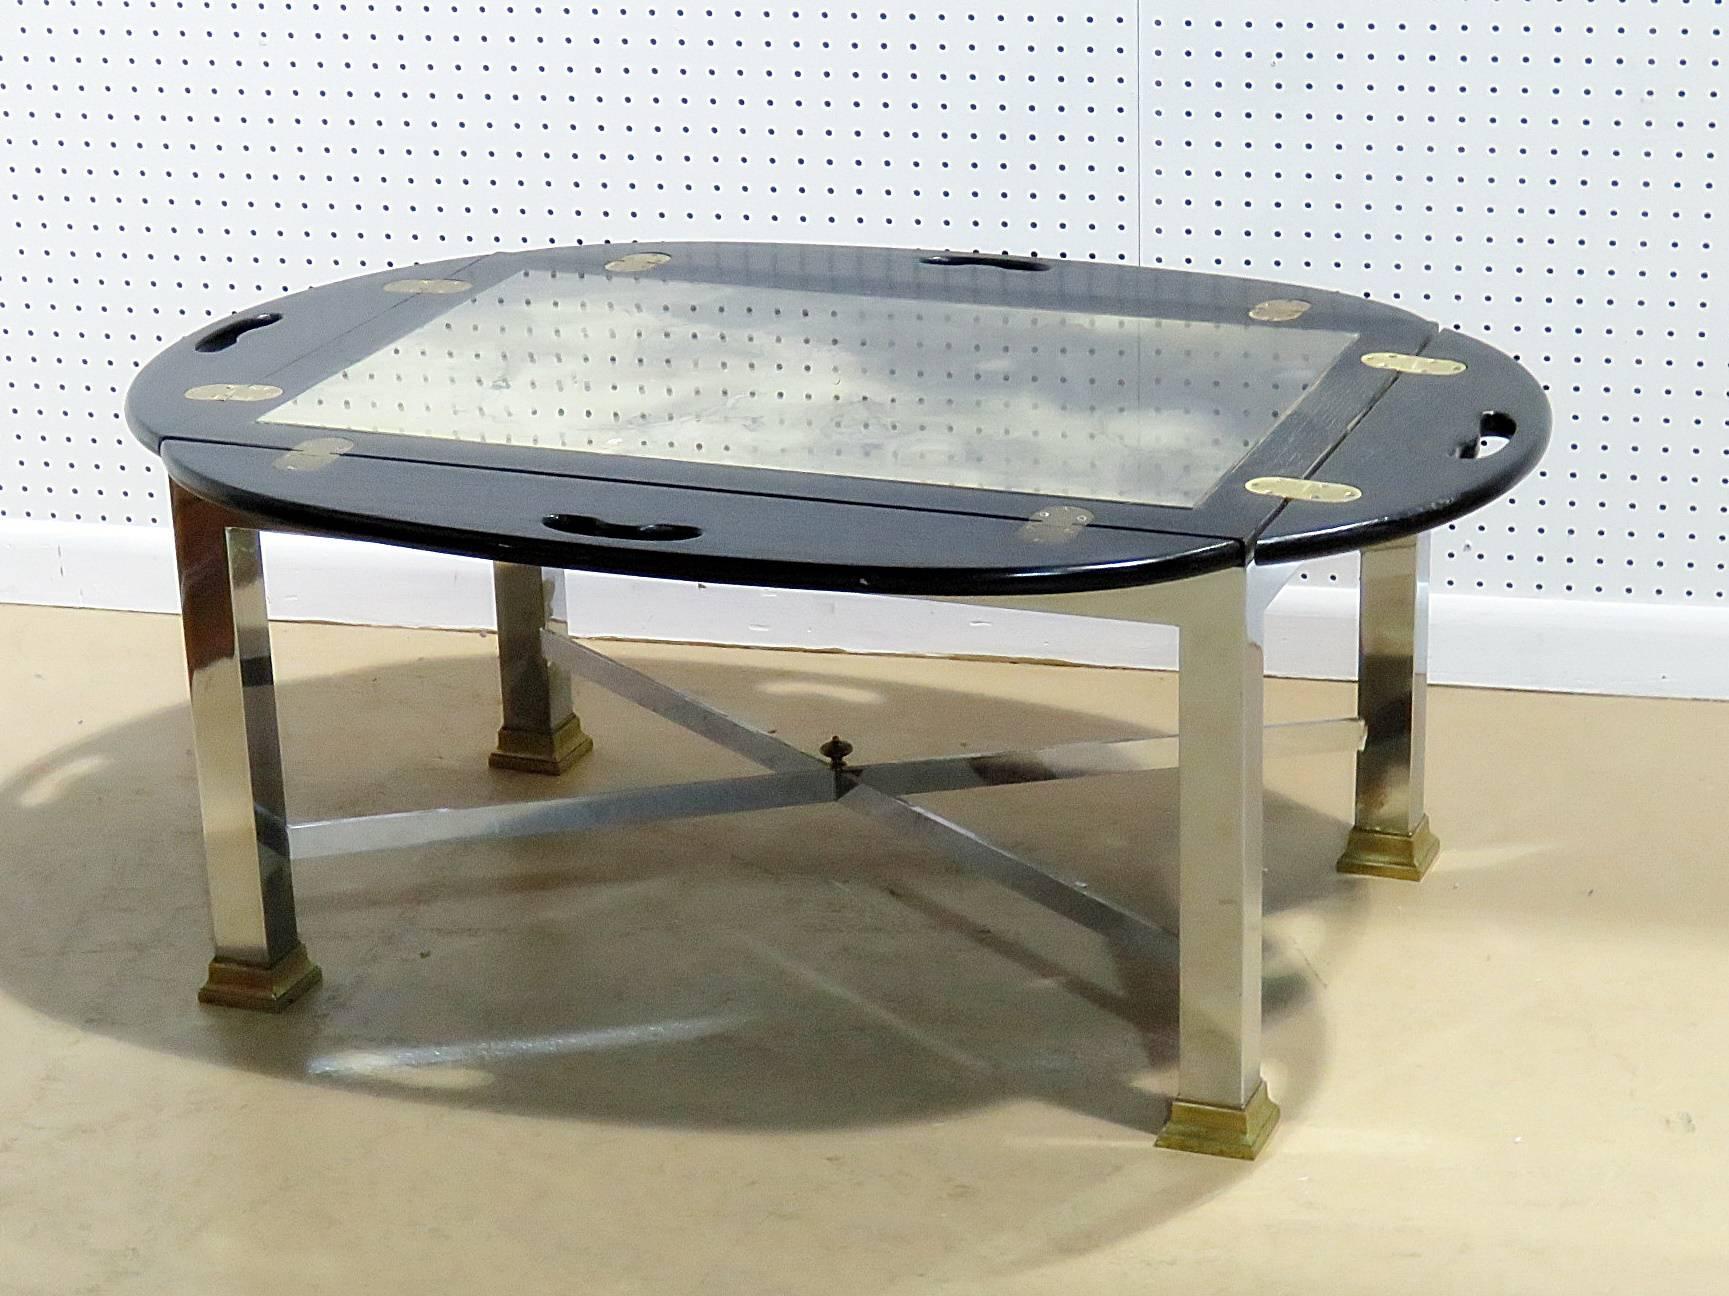 Maison Jansen butler's table with ebonized wood, chromed steel and brass accents. Measurements with leaves up: 22